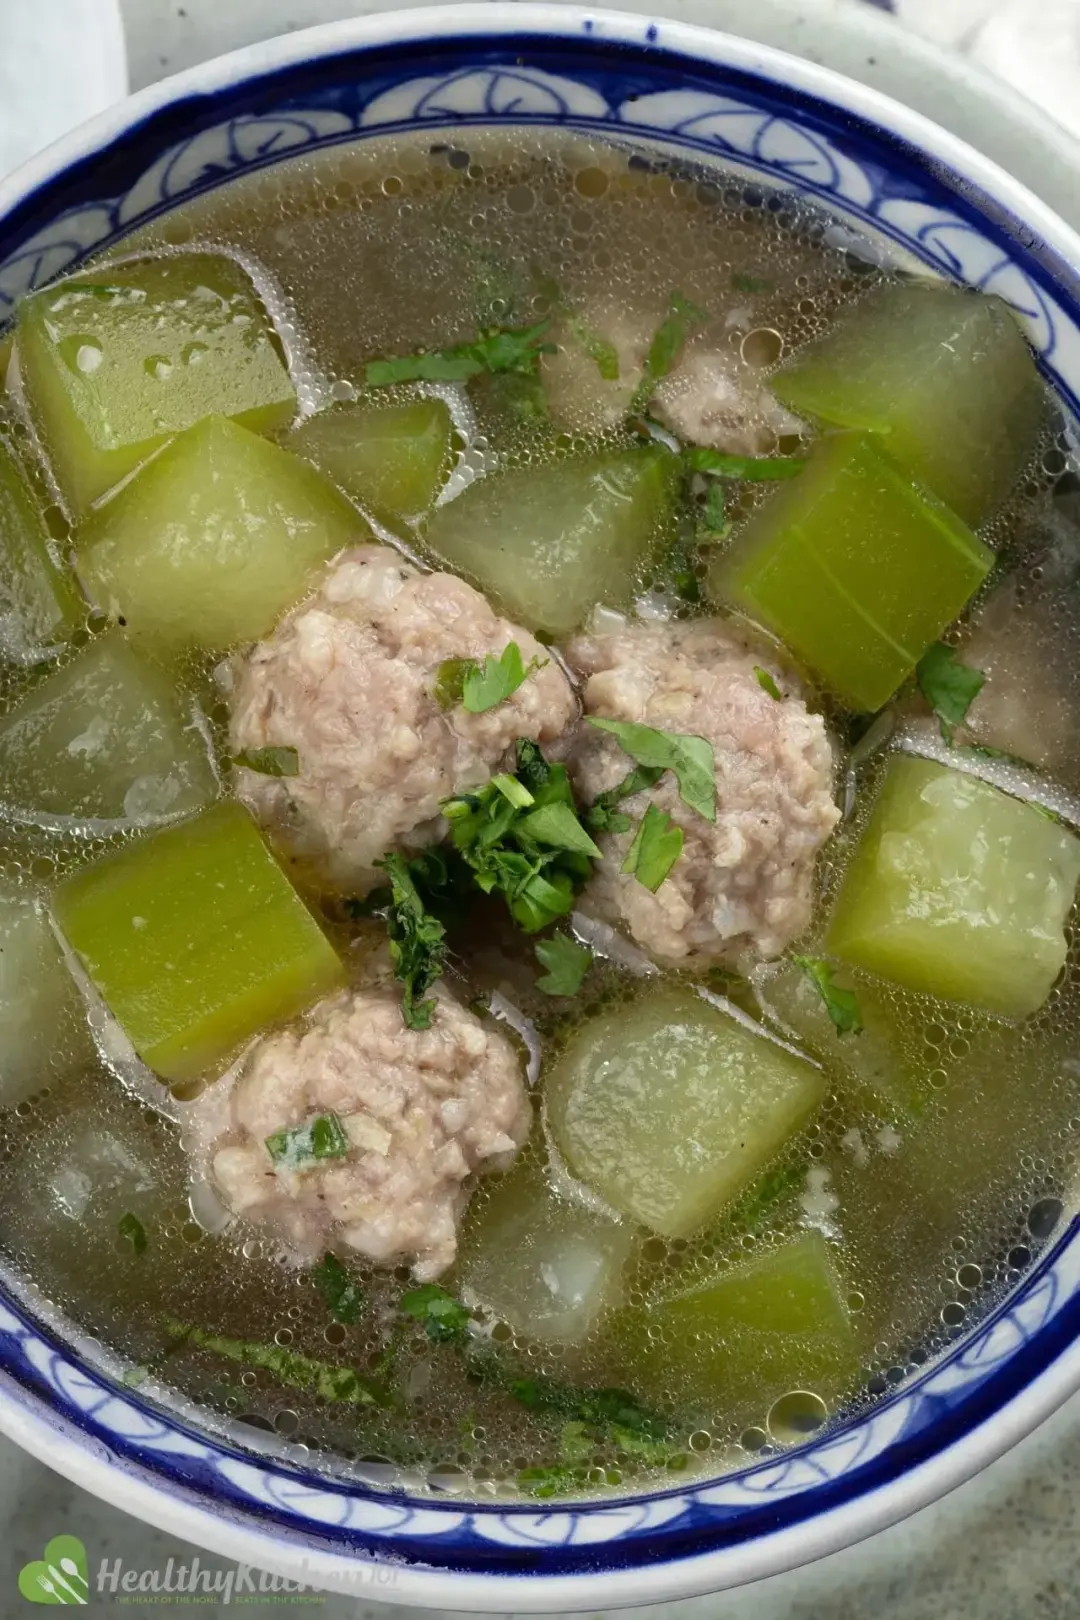 What Goes with Winter Melon Meatball Soup